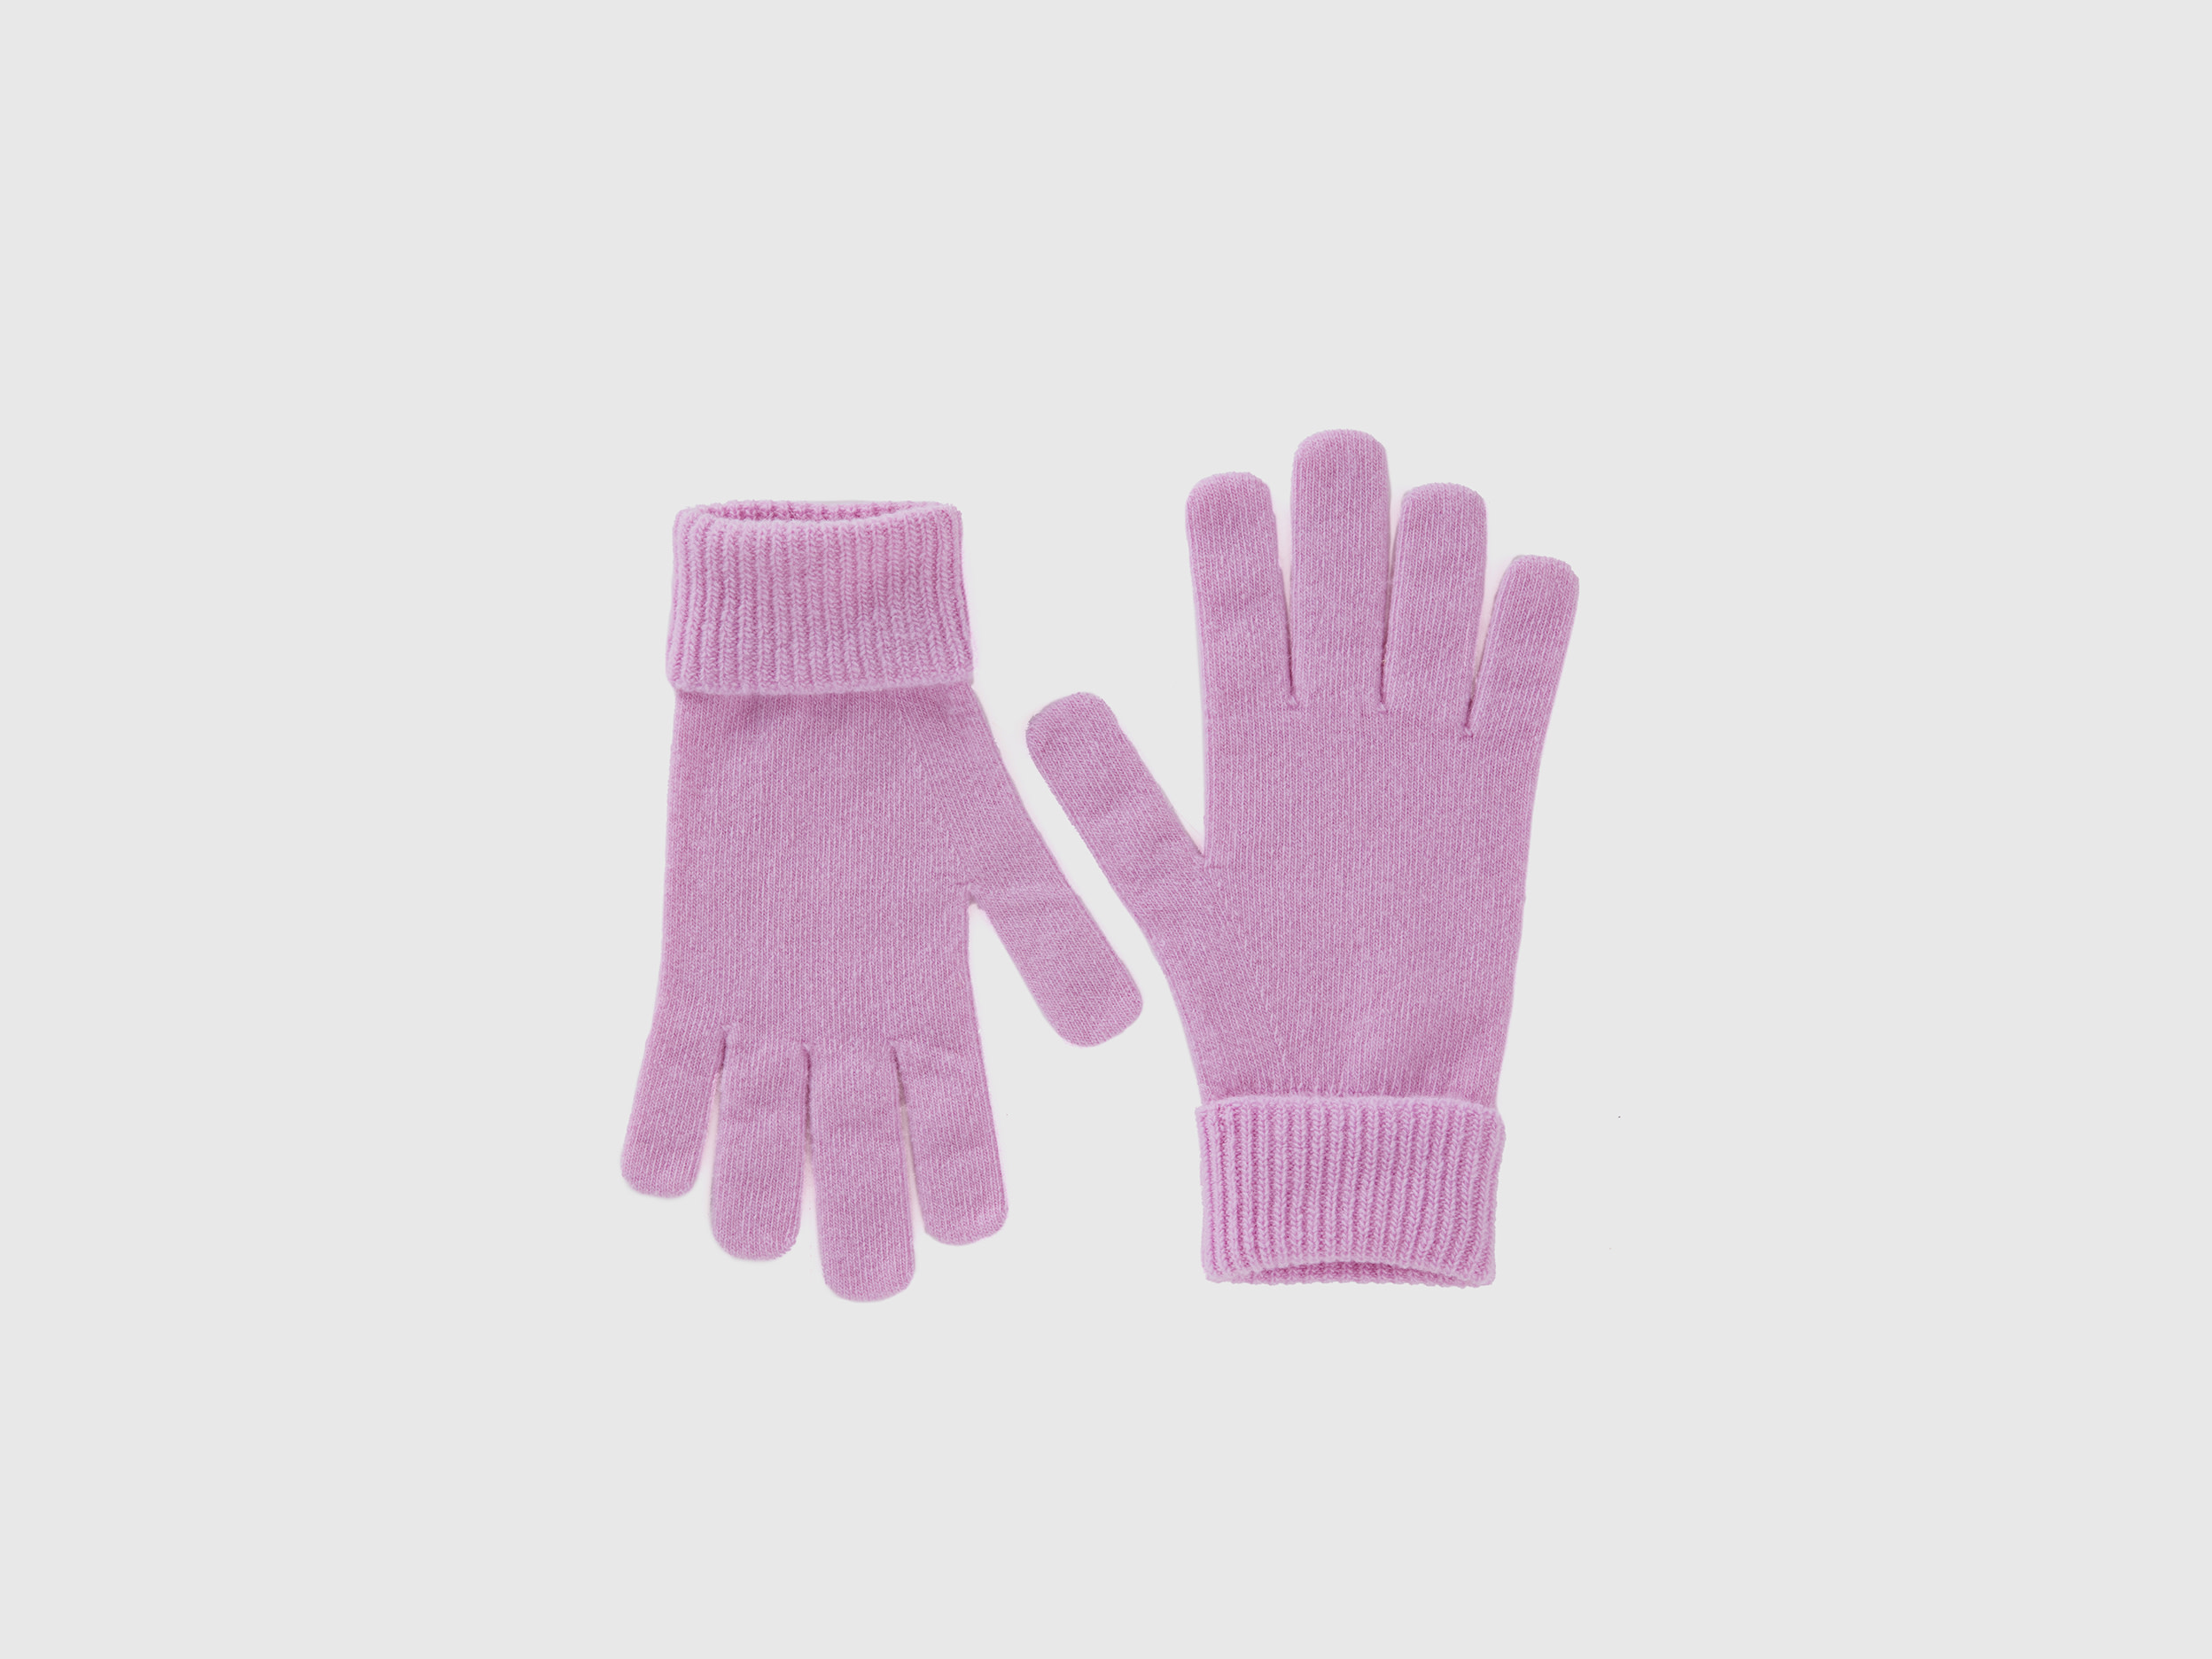 Benetton, Lilac Gloves In Pure Merino Wool, size OS, Lilac, Women